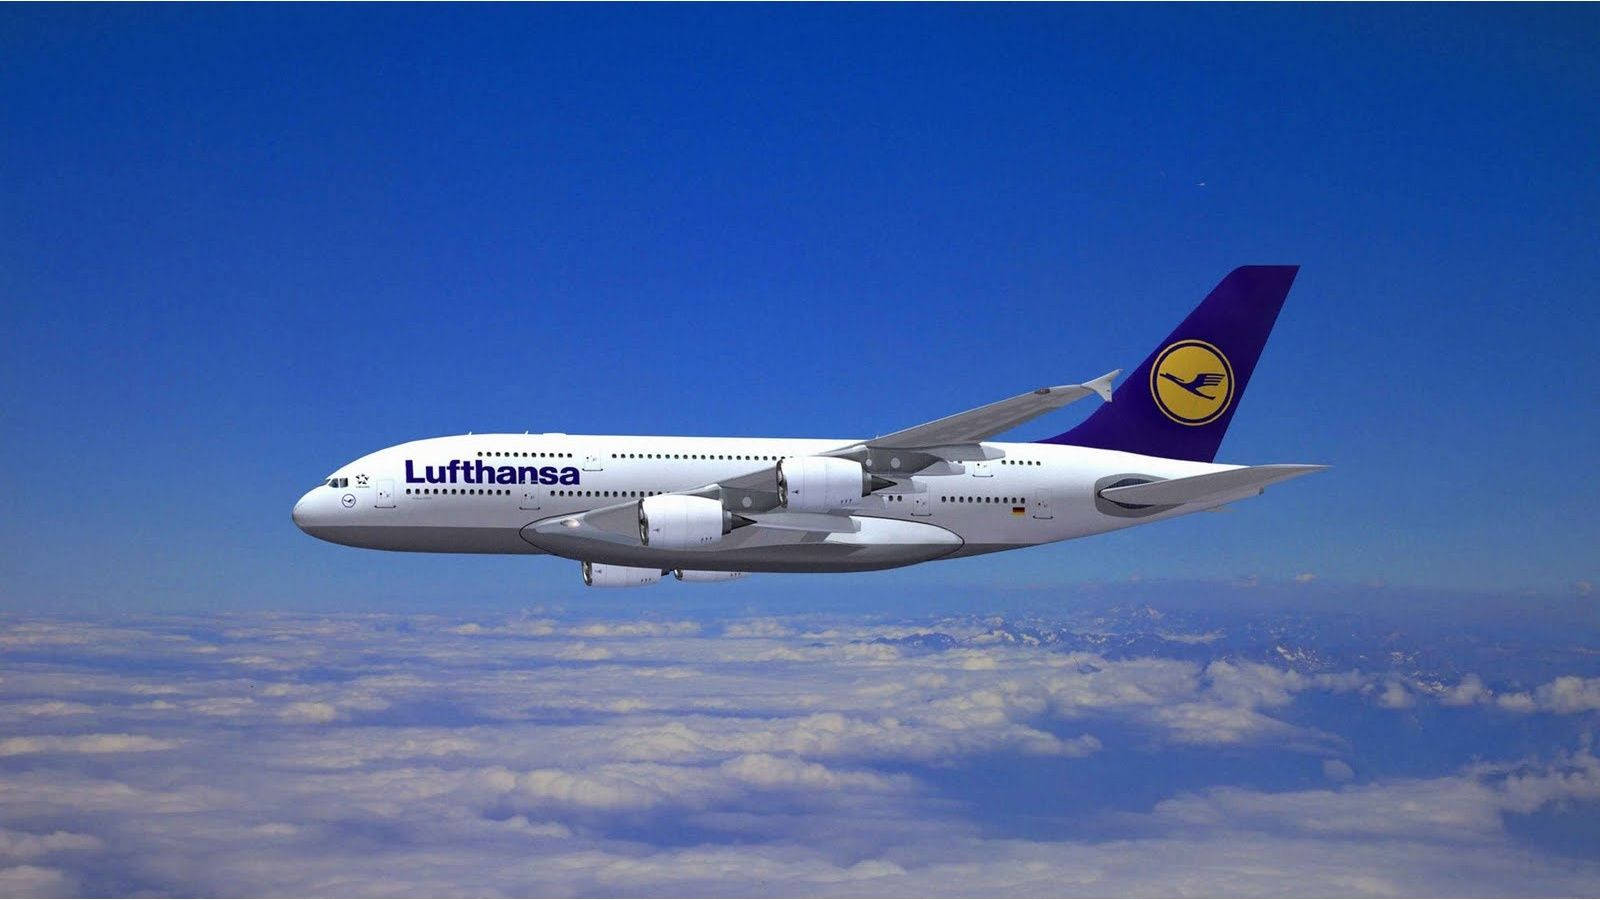 Lufthansa Plane Alone In The Sky Picture